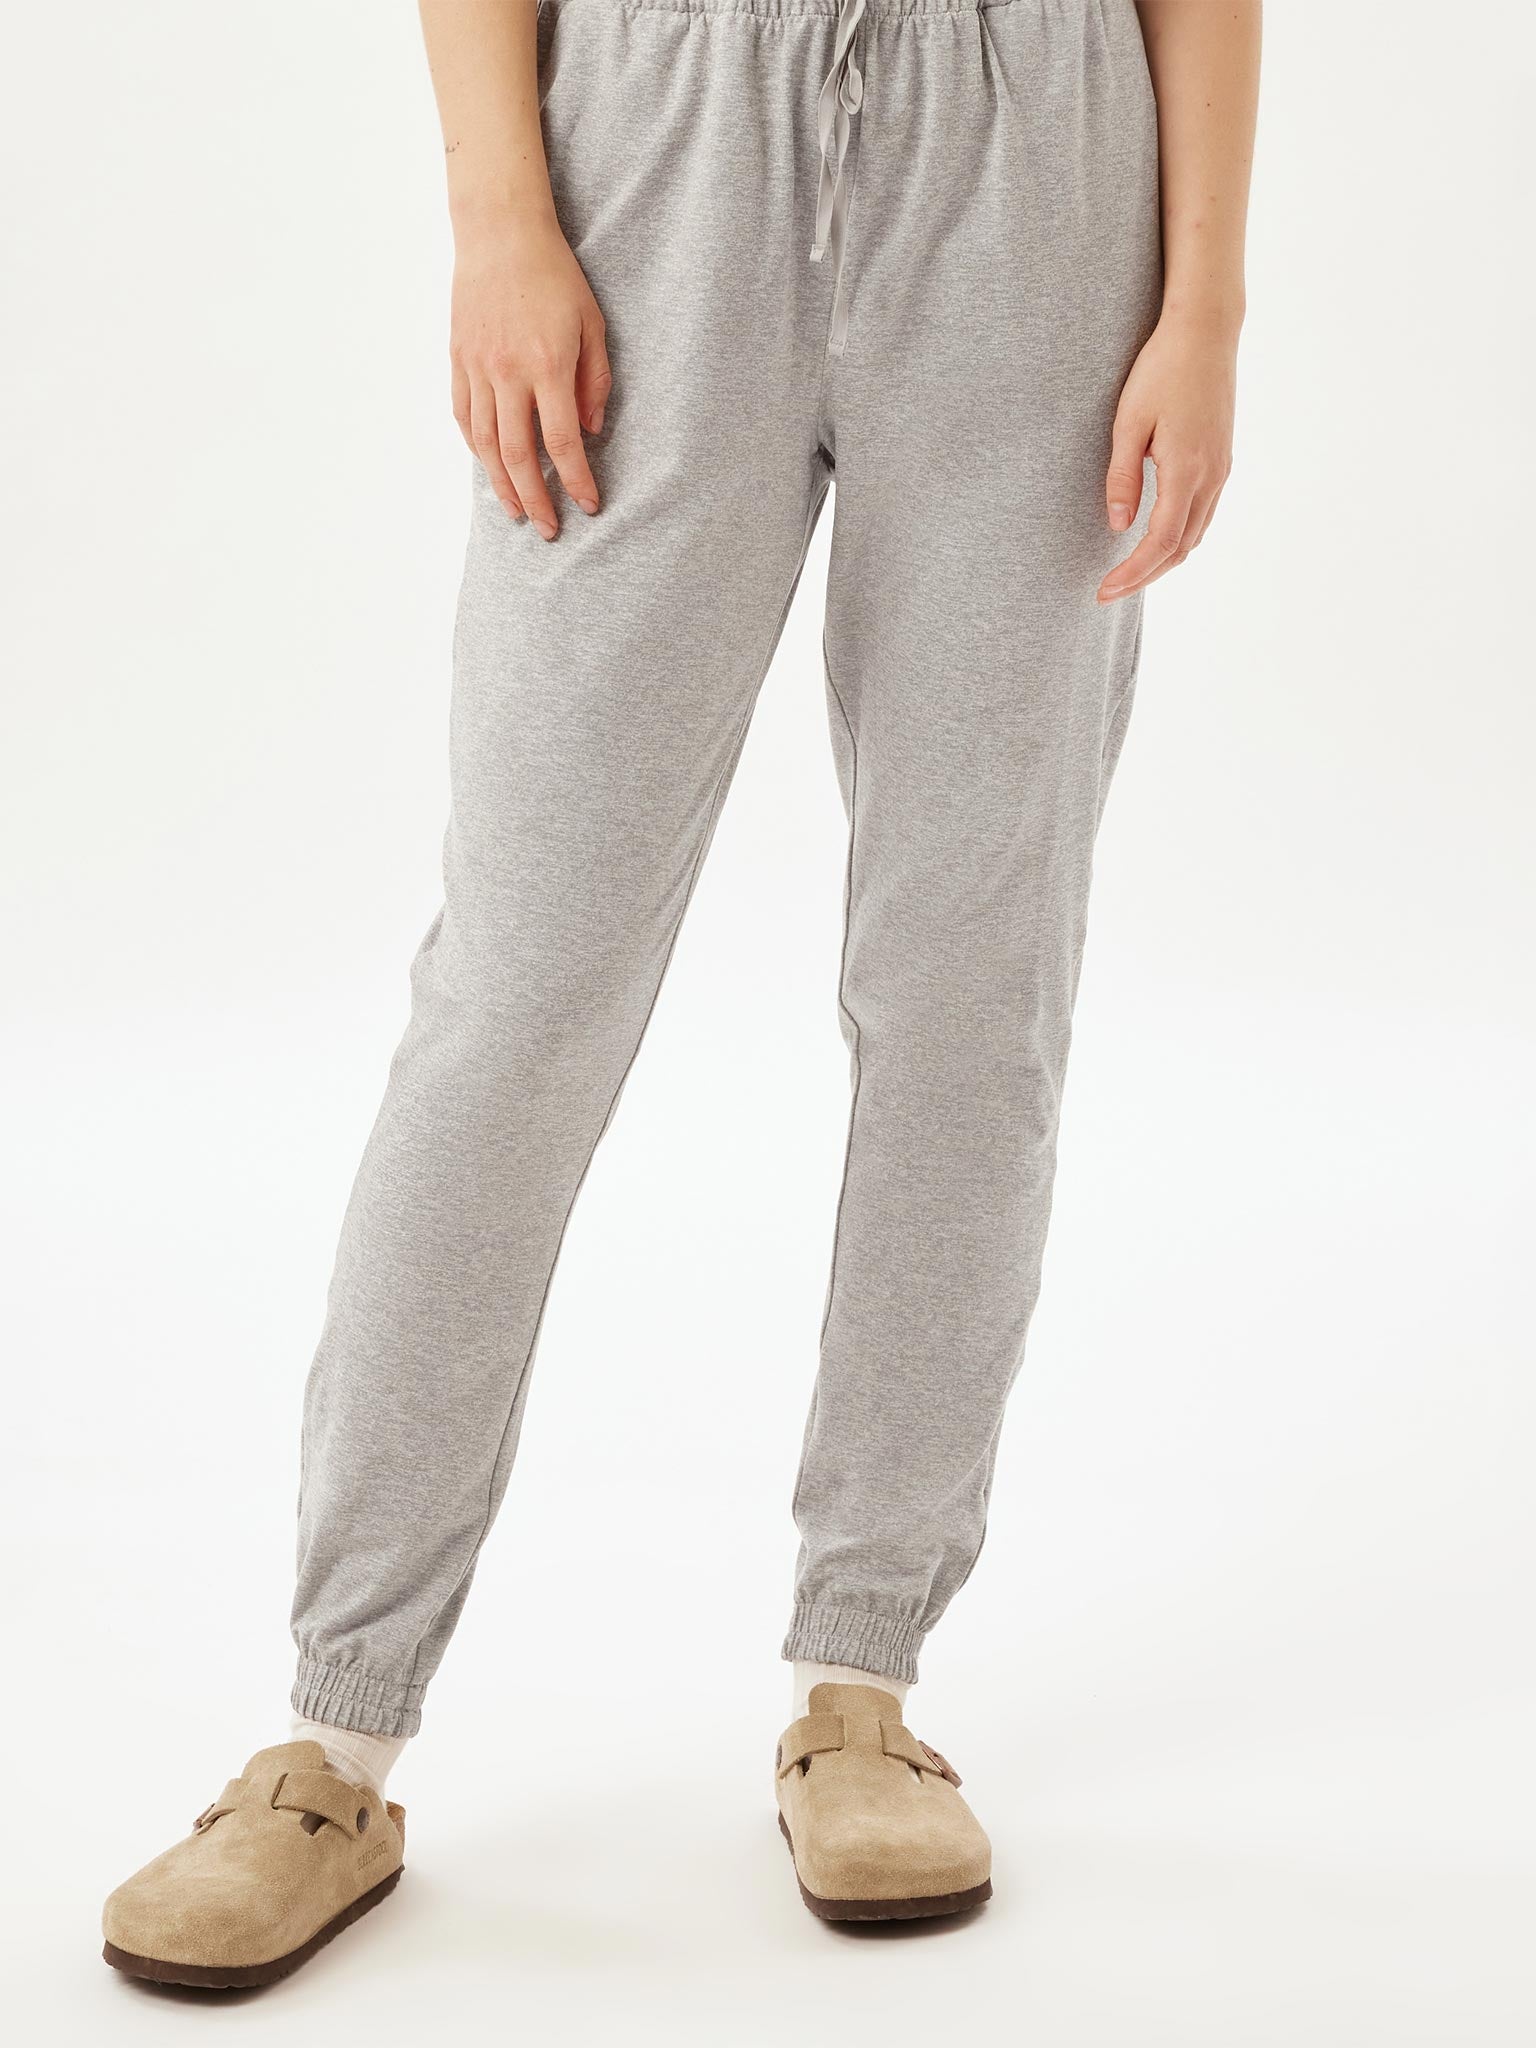 Girlfriend Collective ReSet Slim Straight Jogger - Coyote